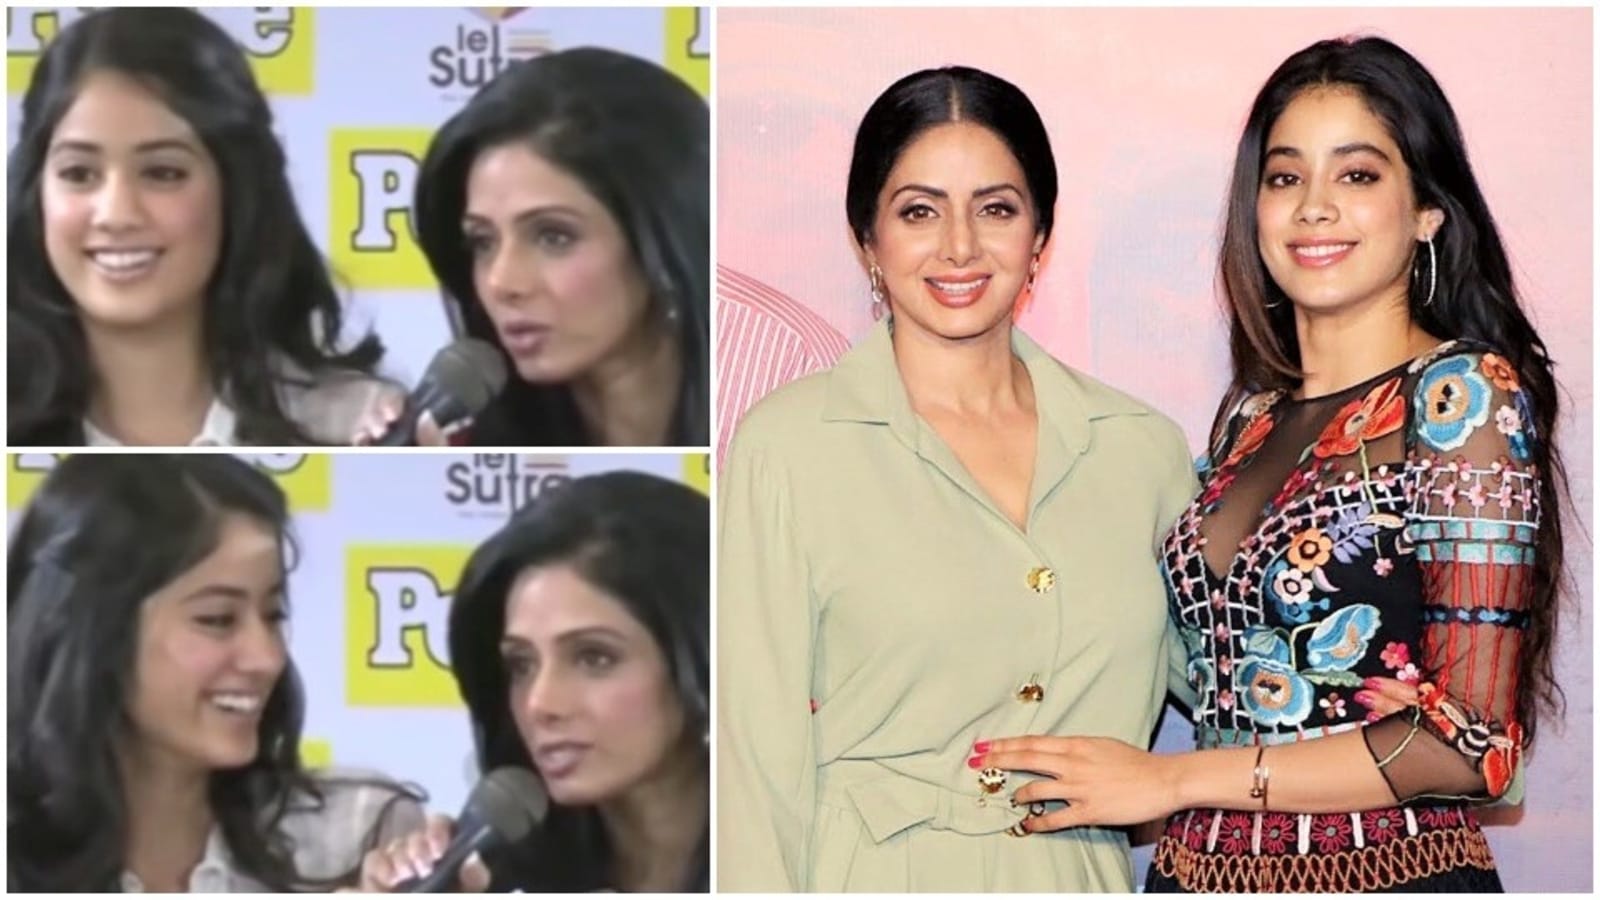 Sridevi Bfvideo - When Sridevi trolled Janhvi Kapoor for not knowing how to speak in Hindi |  Bollywood - Hindustan Times